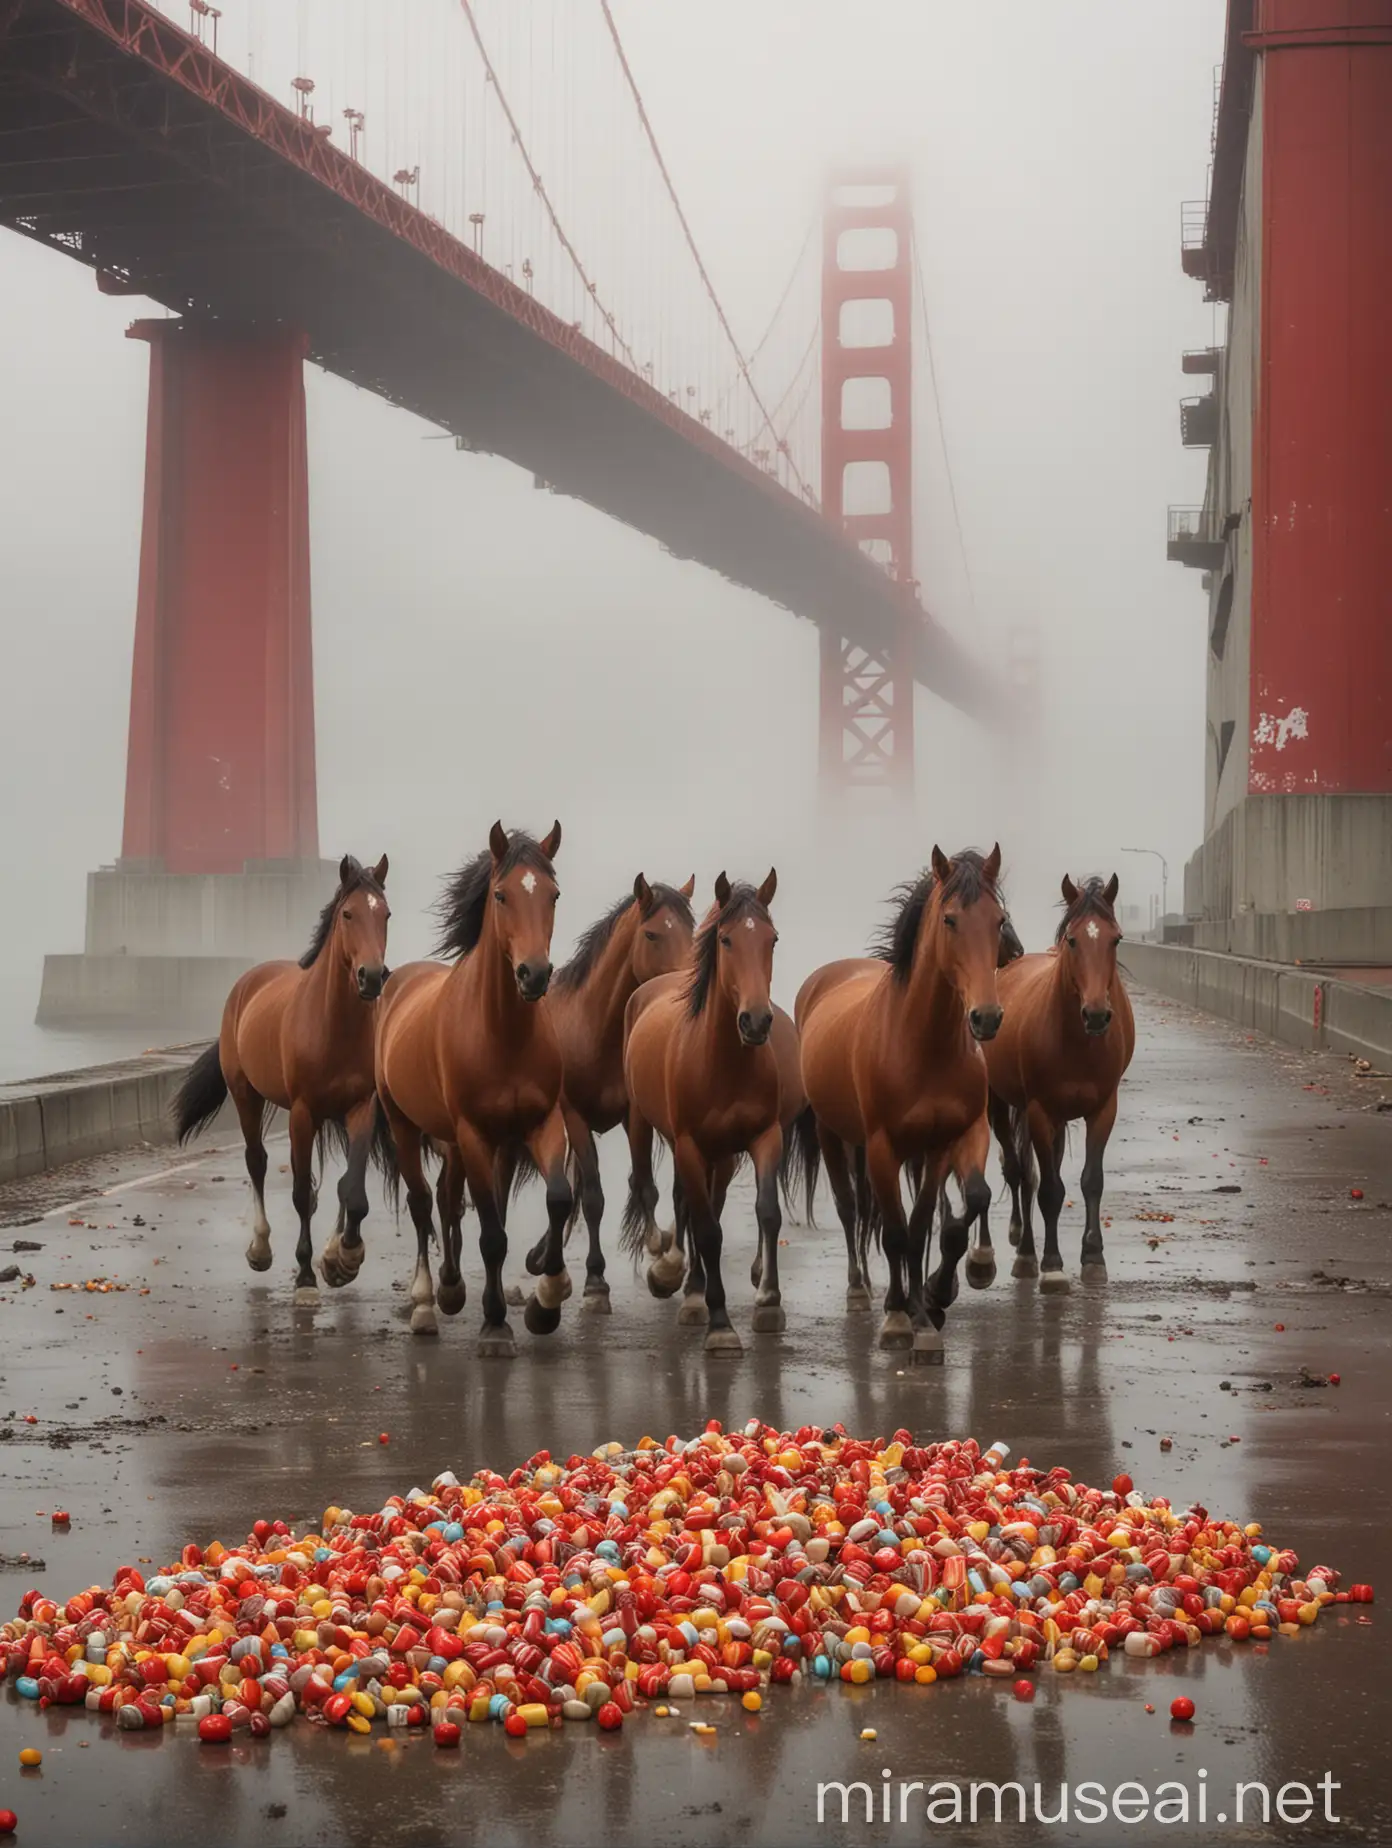  wild horses running on concrete, behind there is visible red san francisco bridge, everything is foggy, whole image should look like movie poster, there are trumpets behind horses arranged in sun rays circular shape, in the first plan there should be big pile of candy and sweets